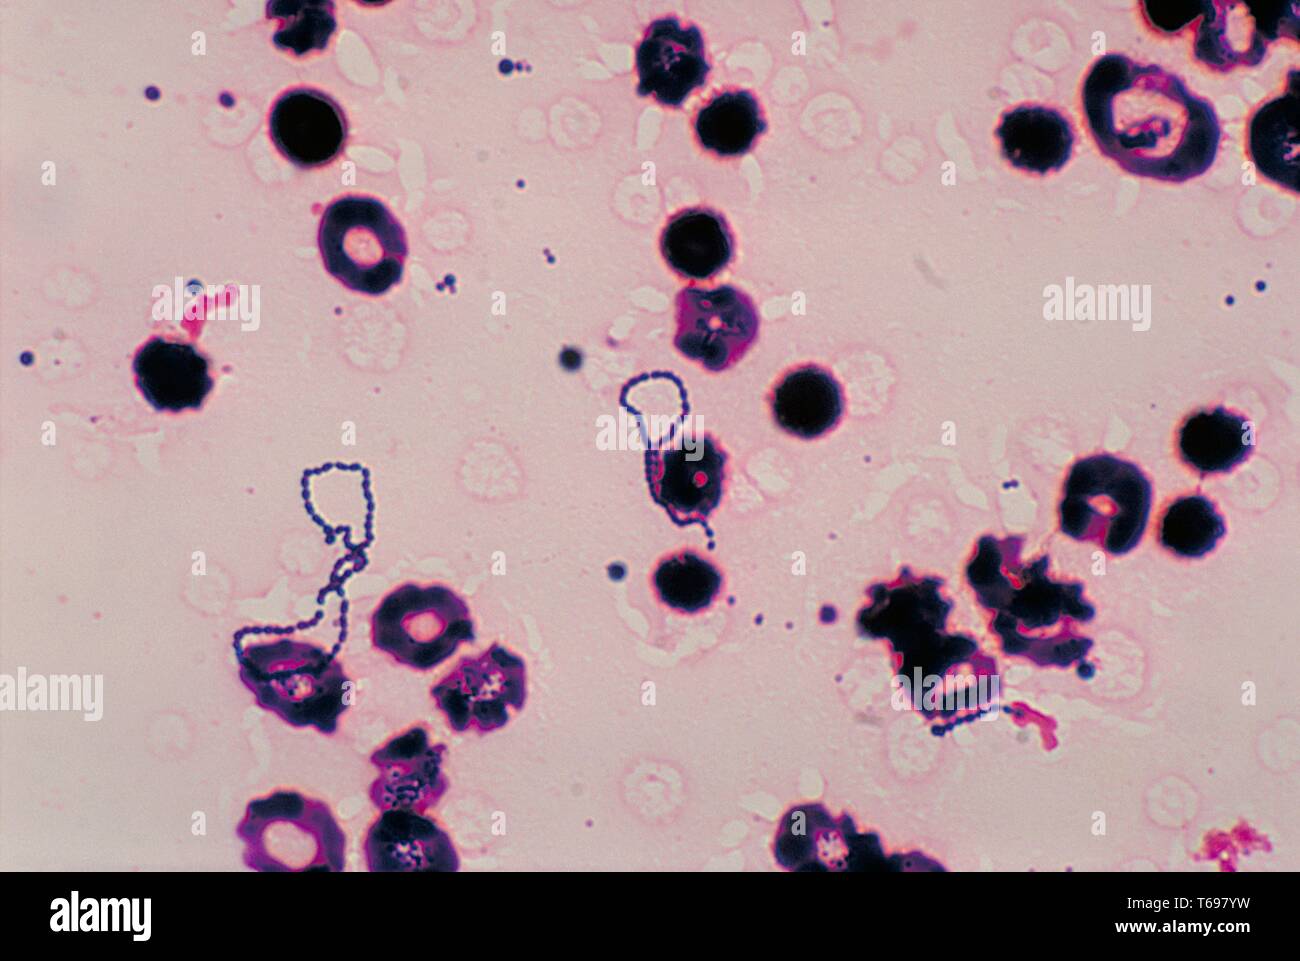 This is a photomicrograph of a blood culture specimen, depicts numbers of Gram-positive, a-hemolytic viridans streptococci group bacteria, most of which were arranged in two long chains, 1978. The viridans streptococci group of bacteria is composed of a number of streptococcal species that are either a-hemolytic, or non-hemolytic. Image courtesy CDC/Dr. Mike Miller. Stock Photo